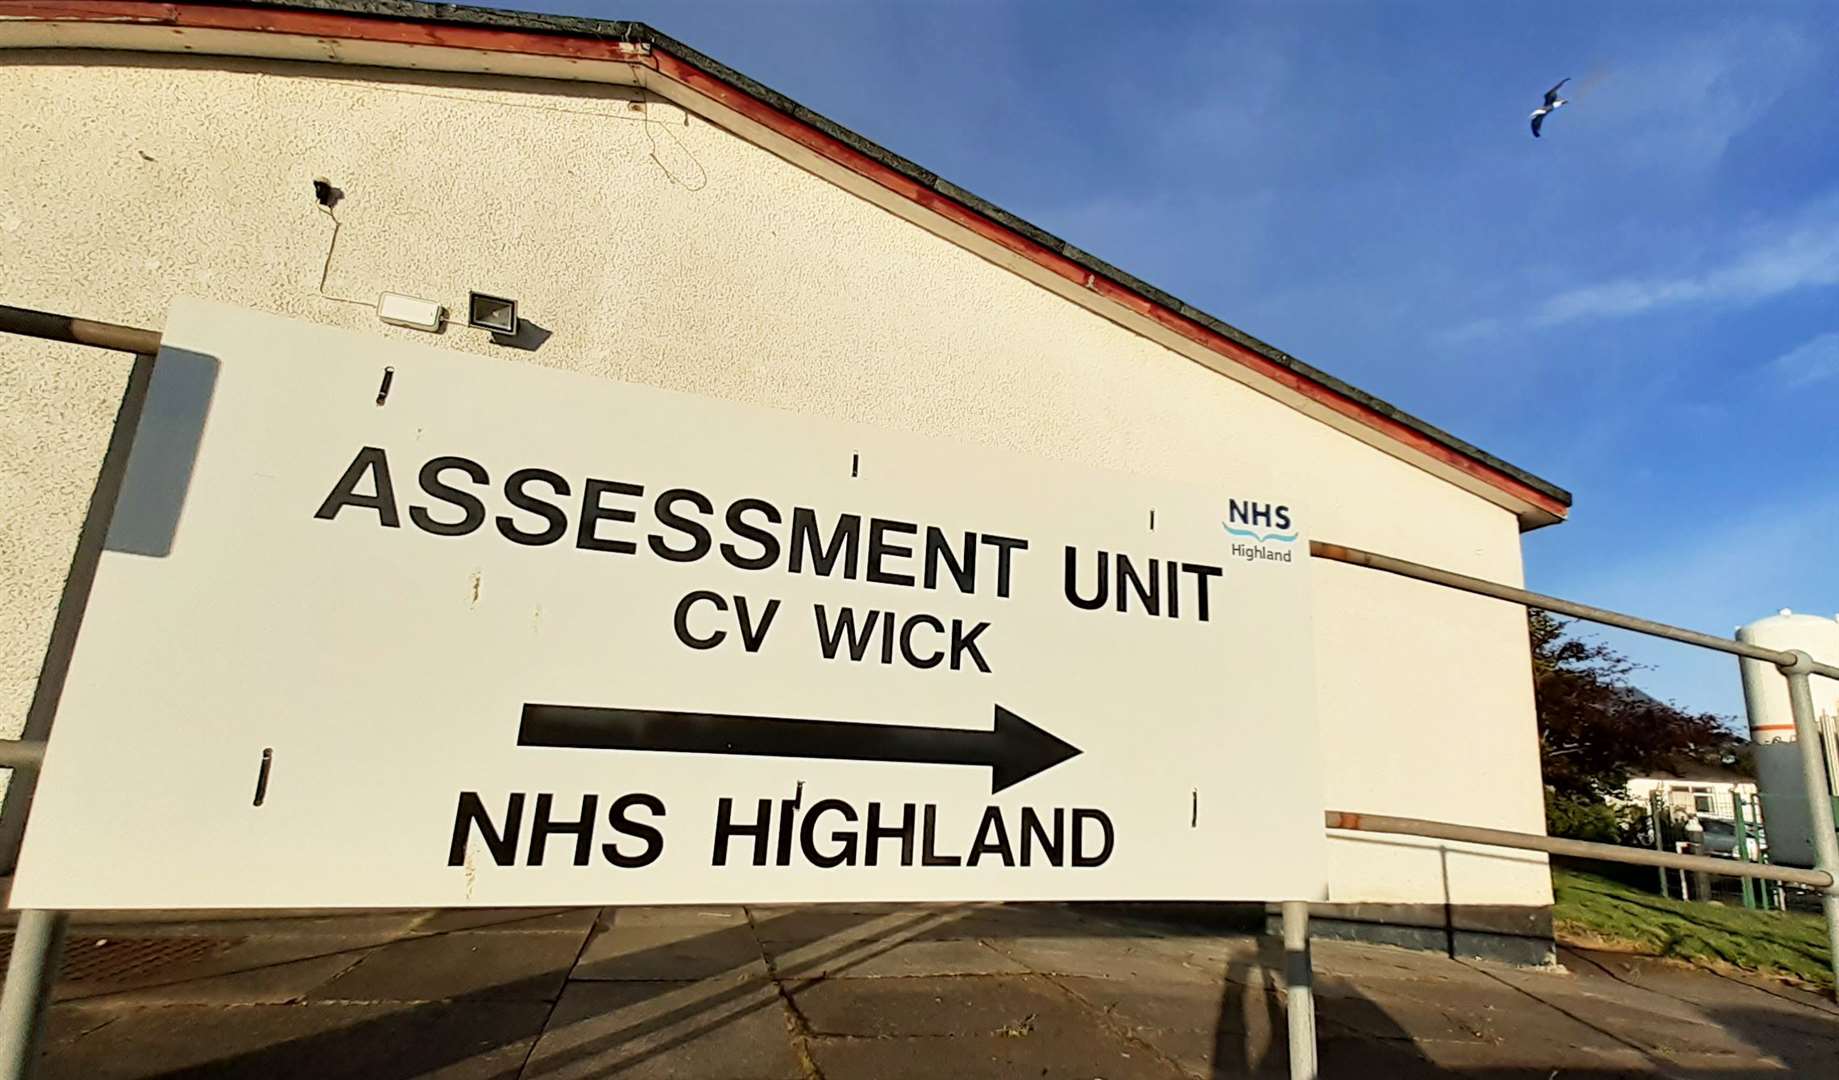 A sign pointing to the NHS Highland coronavirus assessment unit in Wick.